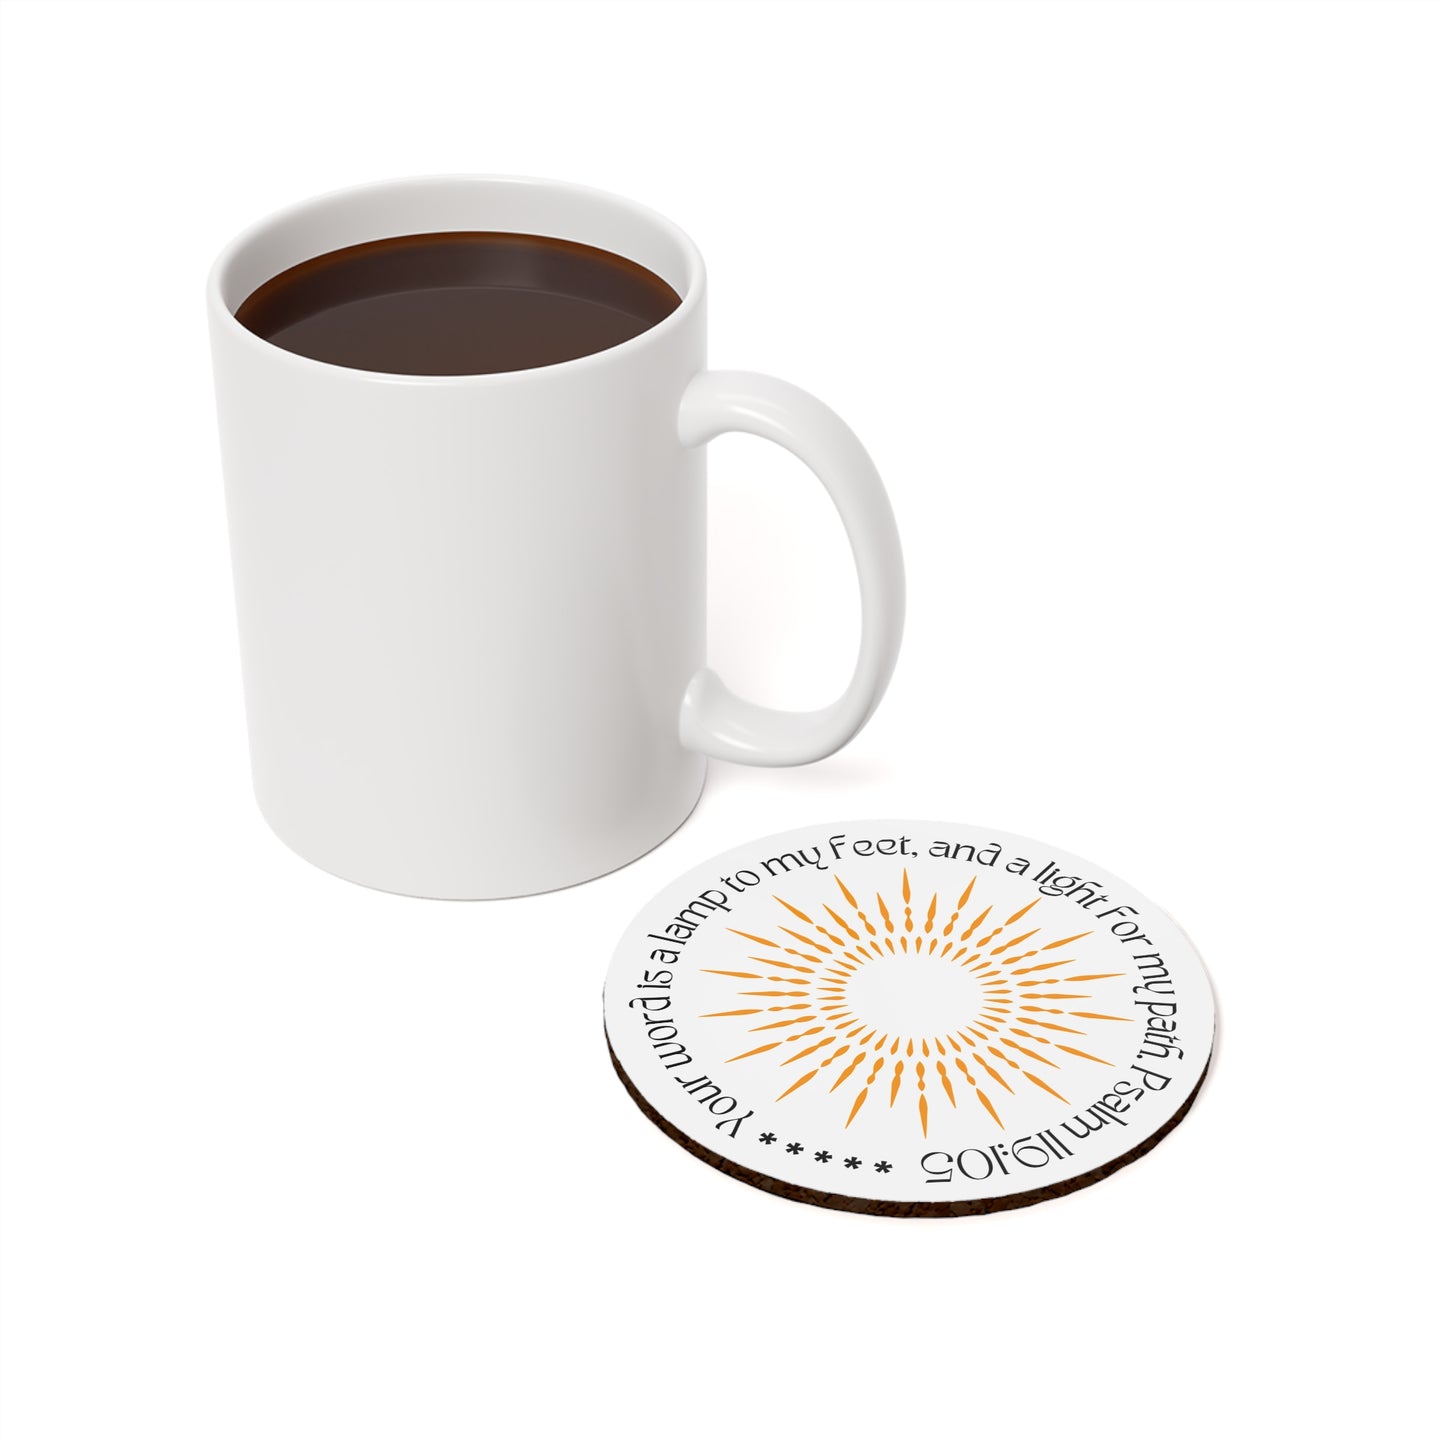 Coaster for Candles, Mugs, Glasses, Your Word Is A Lamp To My Feet